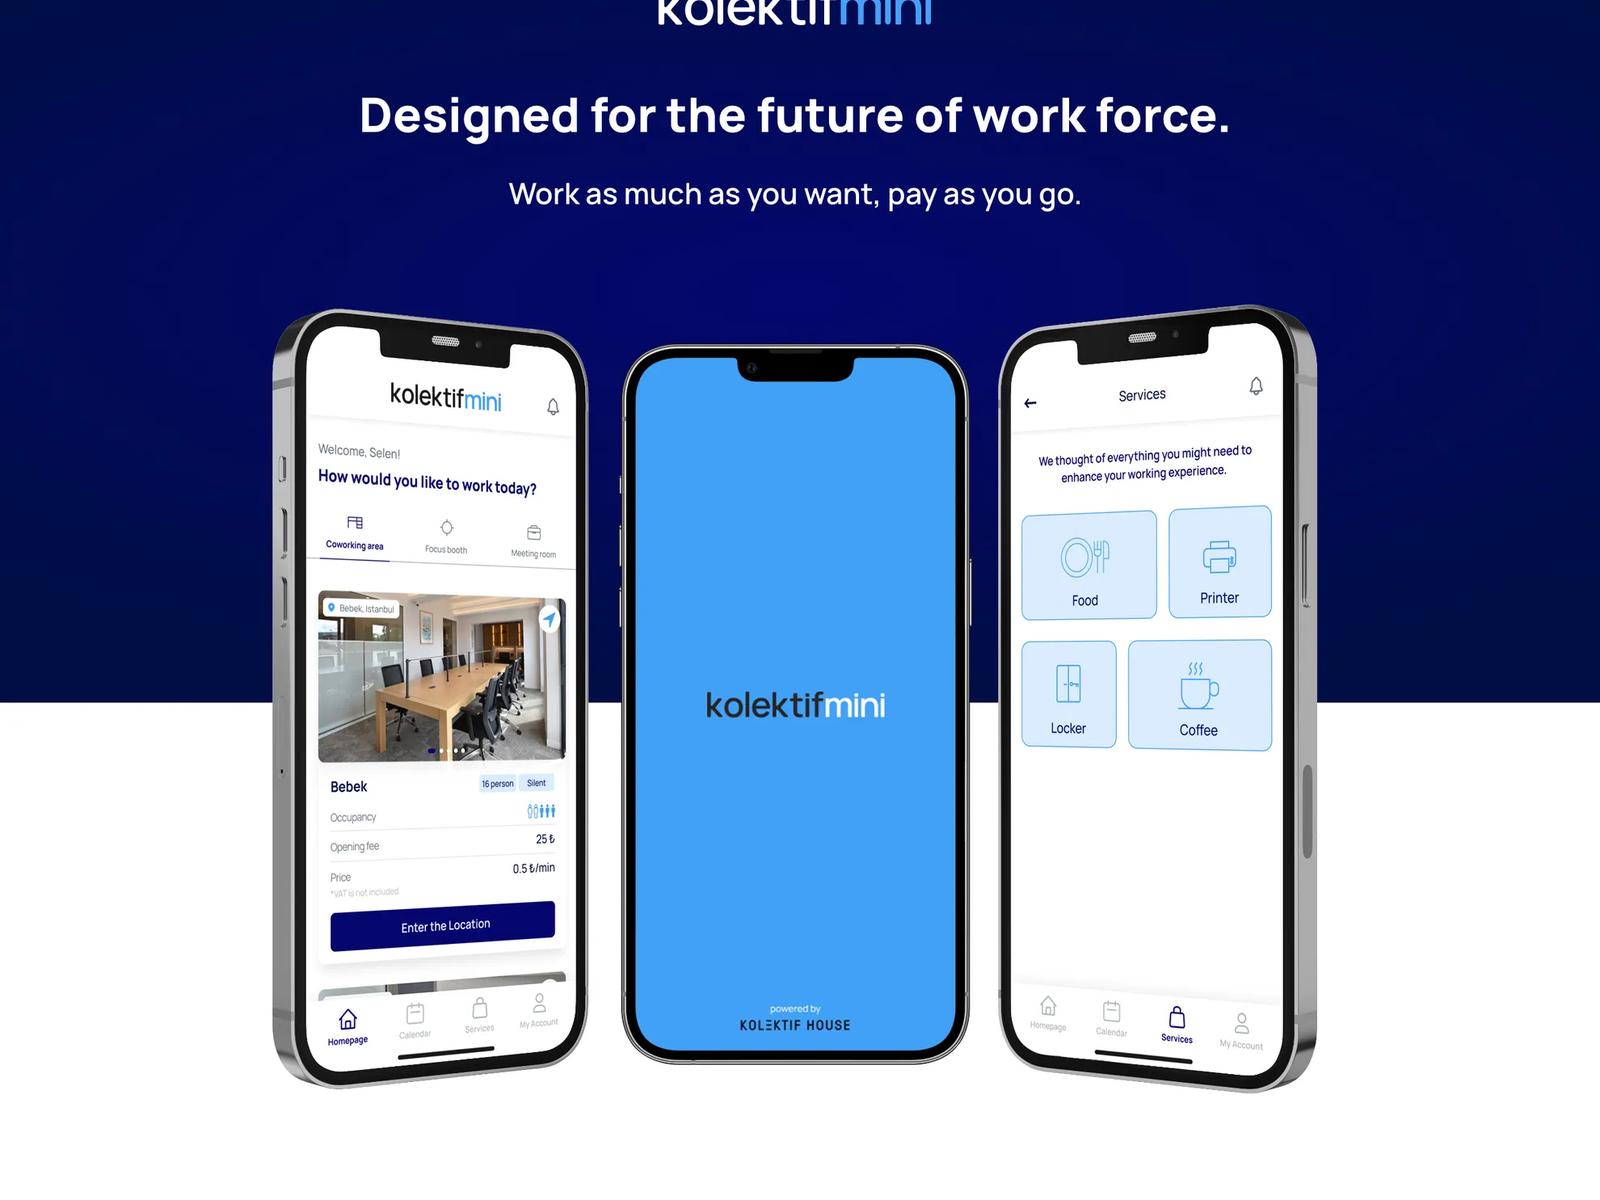 Designed for the Future of Workforce